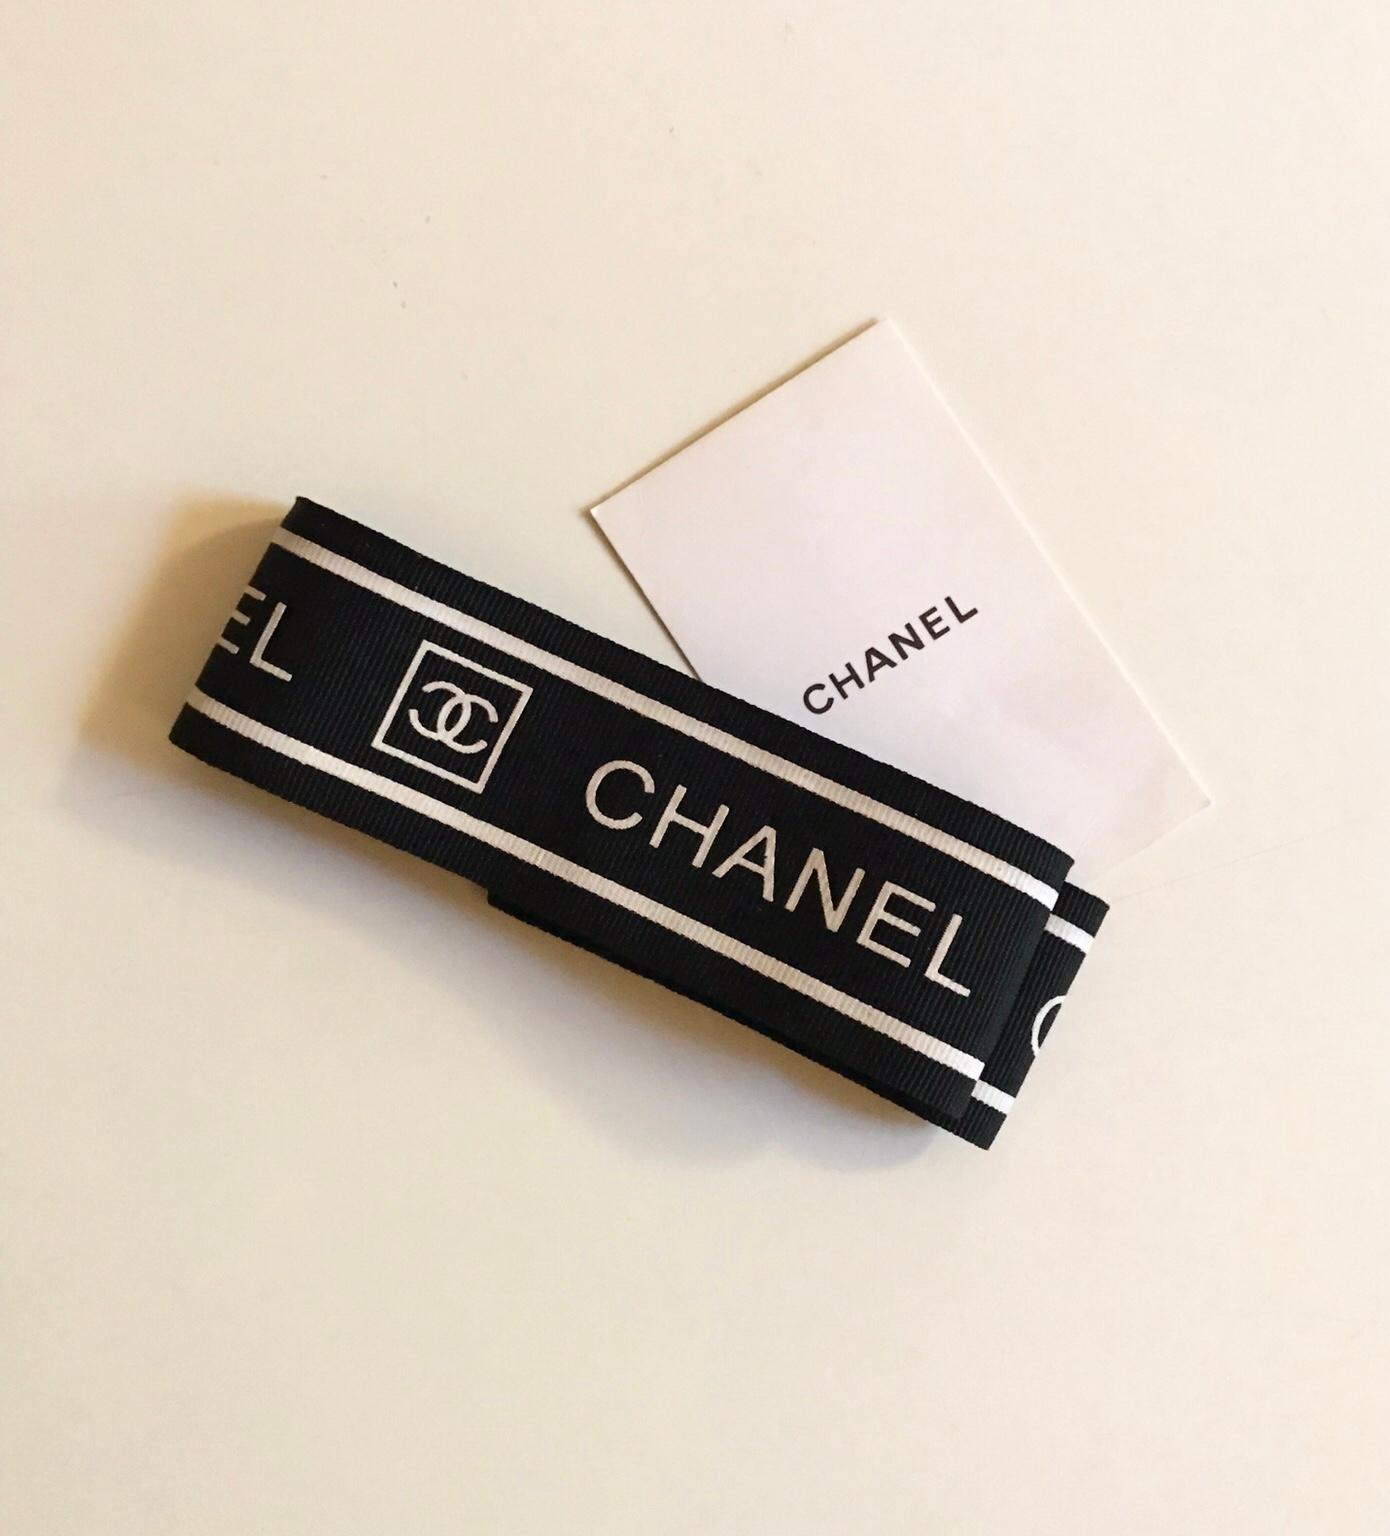 Chanel fascia logo VIP GIFT!😍 NEW in 20900 Monza for €80.00 for sale |  Shpock